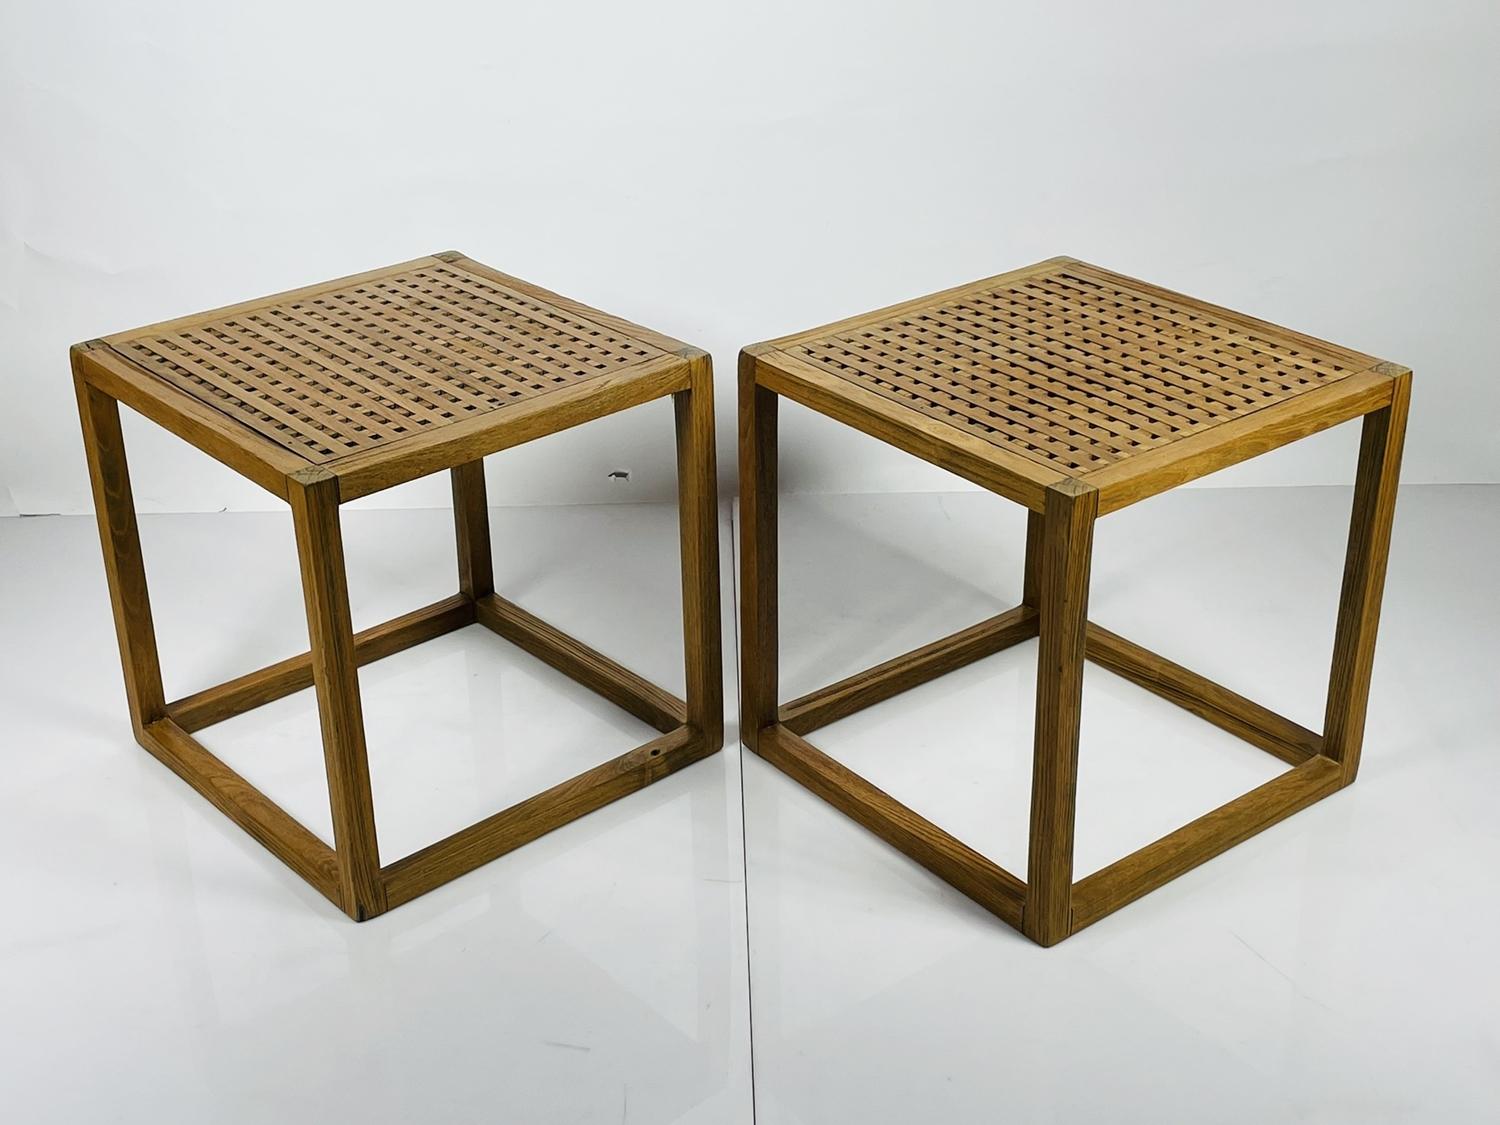 American Pair of Teak Lattice Cube Tables by Summit Furniture For Sale